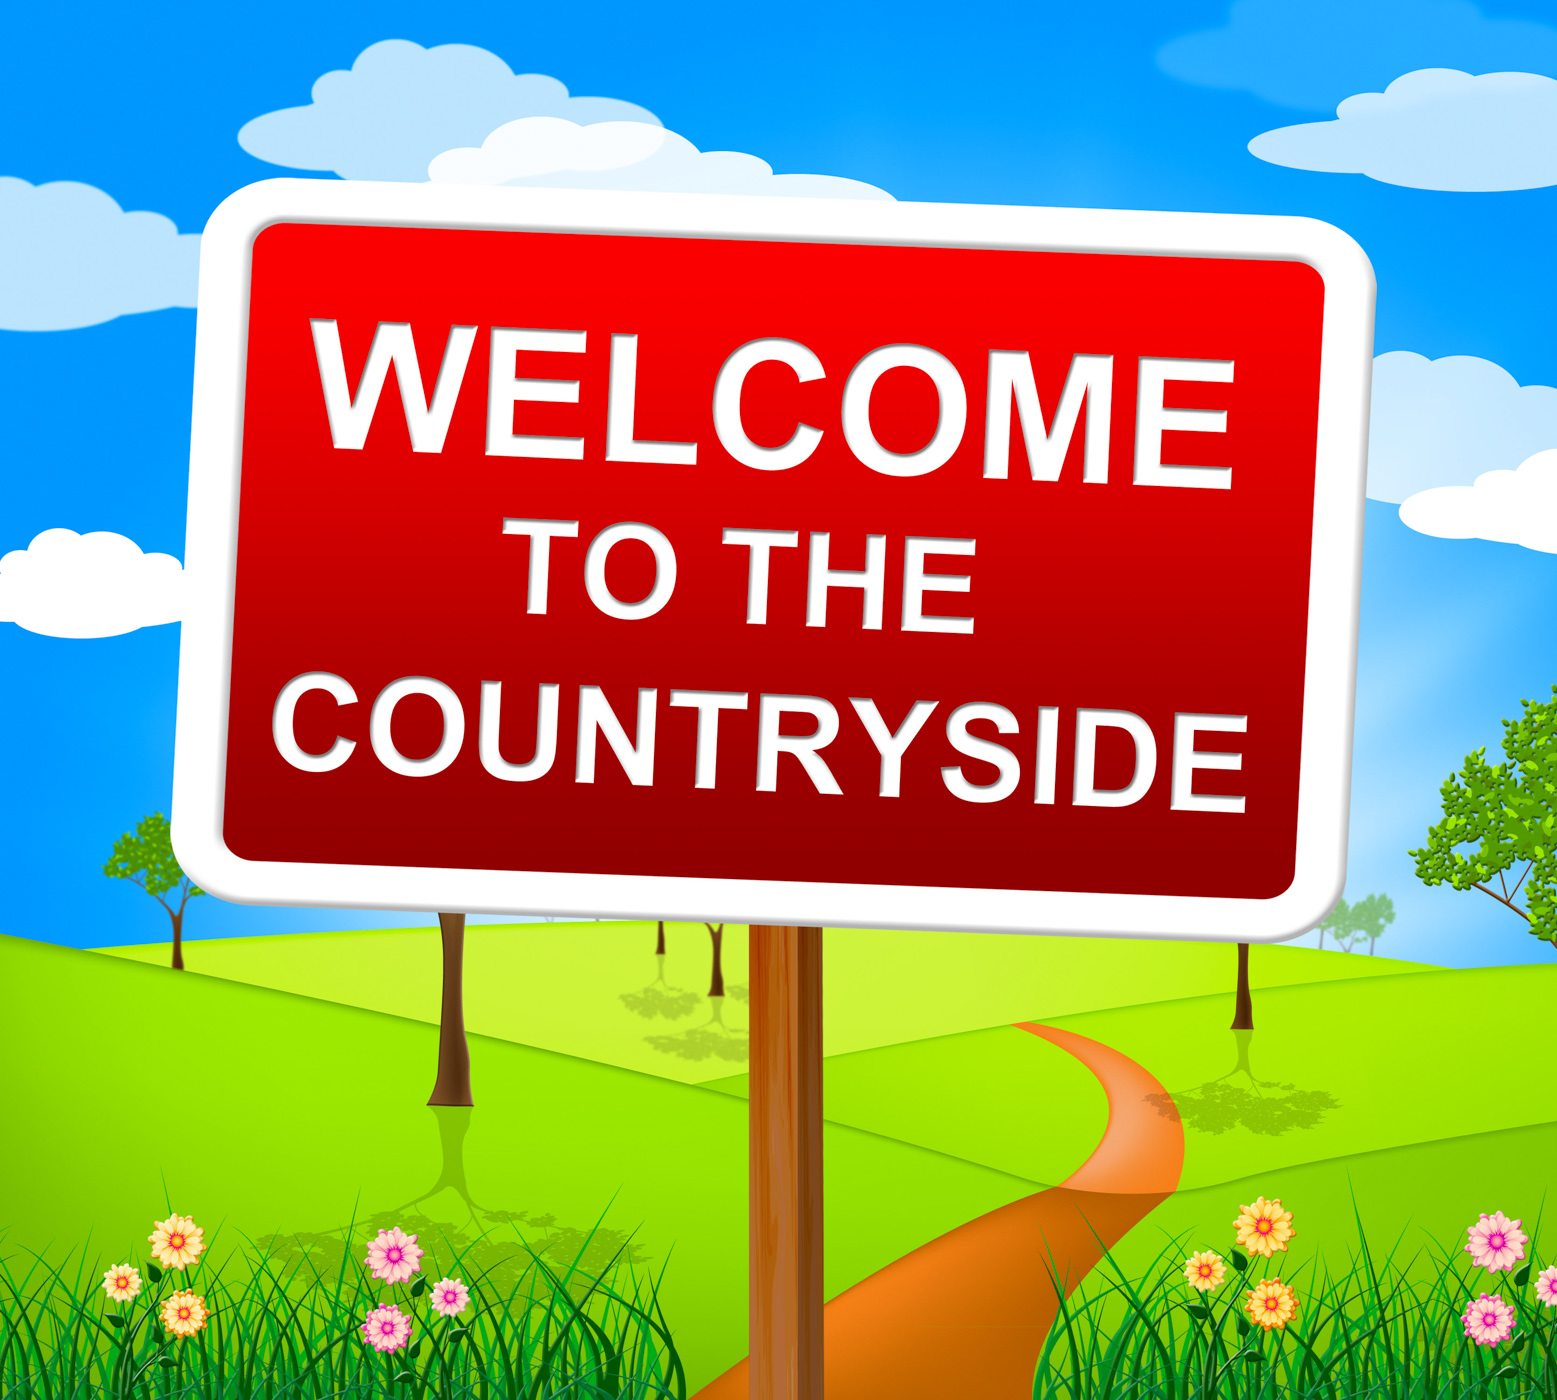 Countryside welcome means greetings landscape and greeting photo